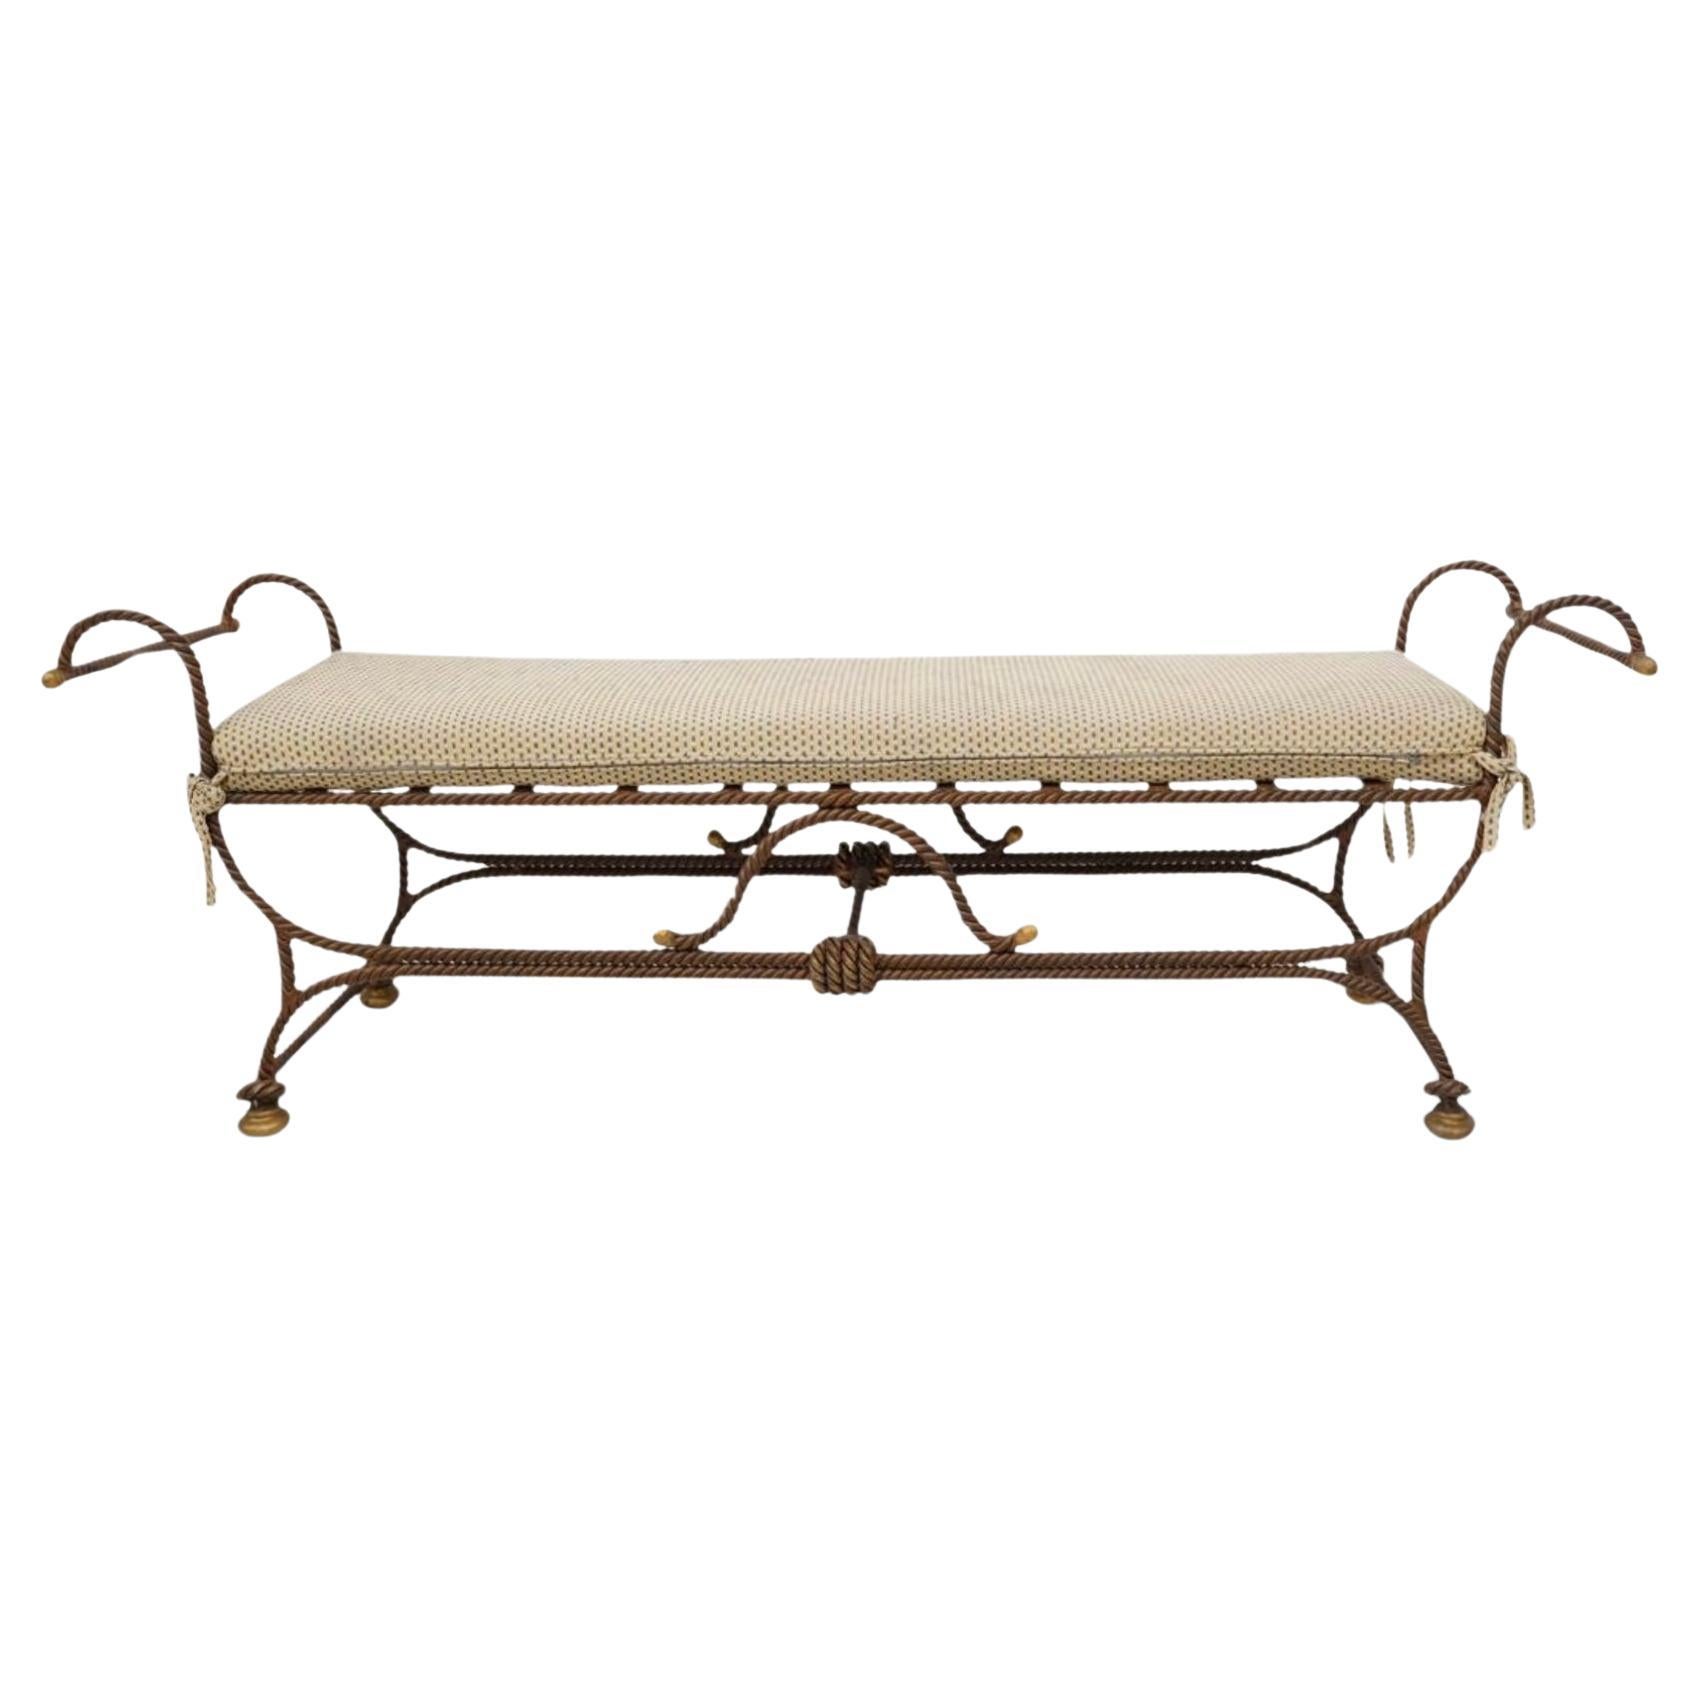 Italian Hollywood Regency Neo-Classical Style Wrought Iron Bench W/ Rope / Tassel Motif For Sale